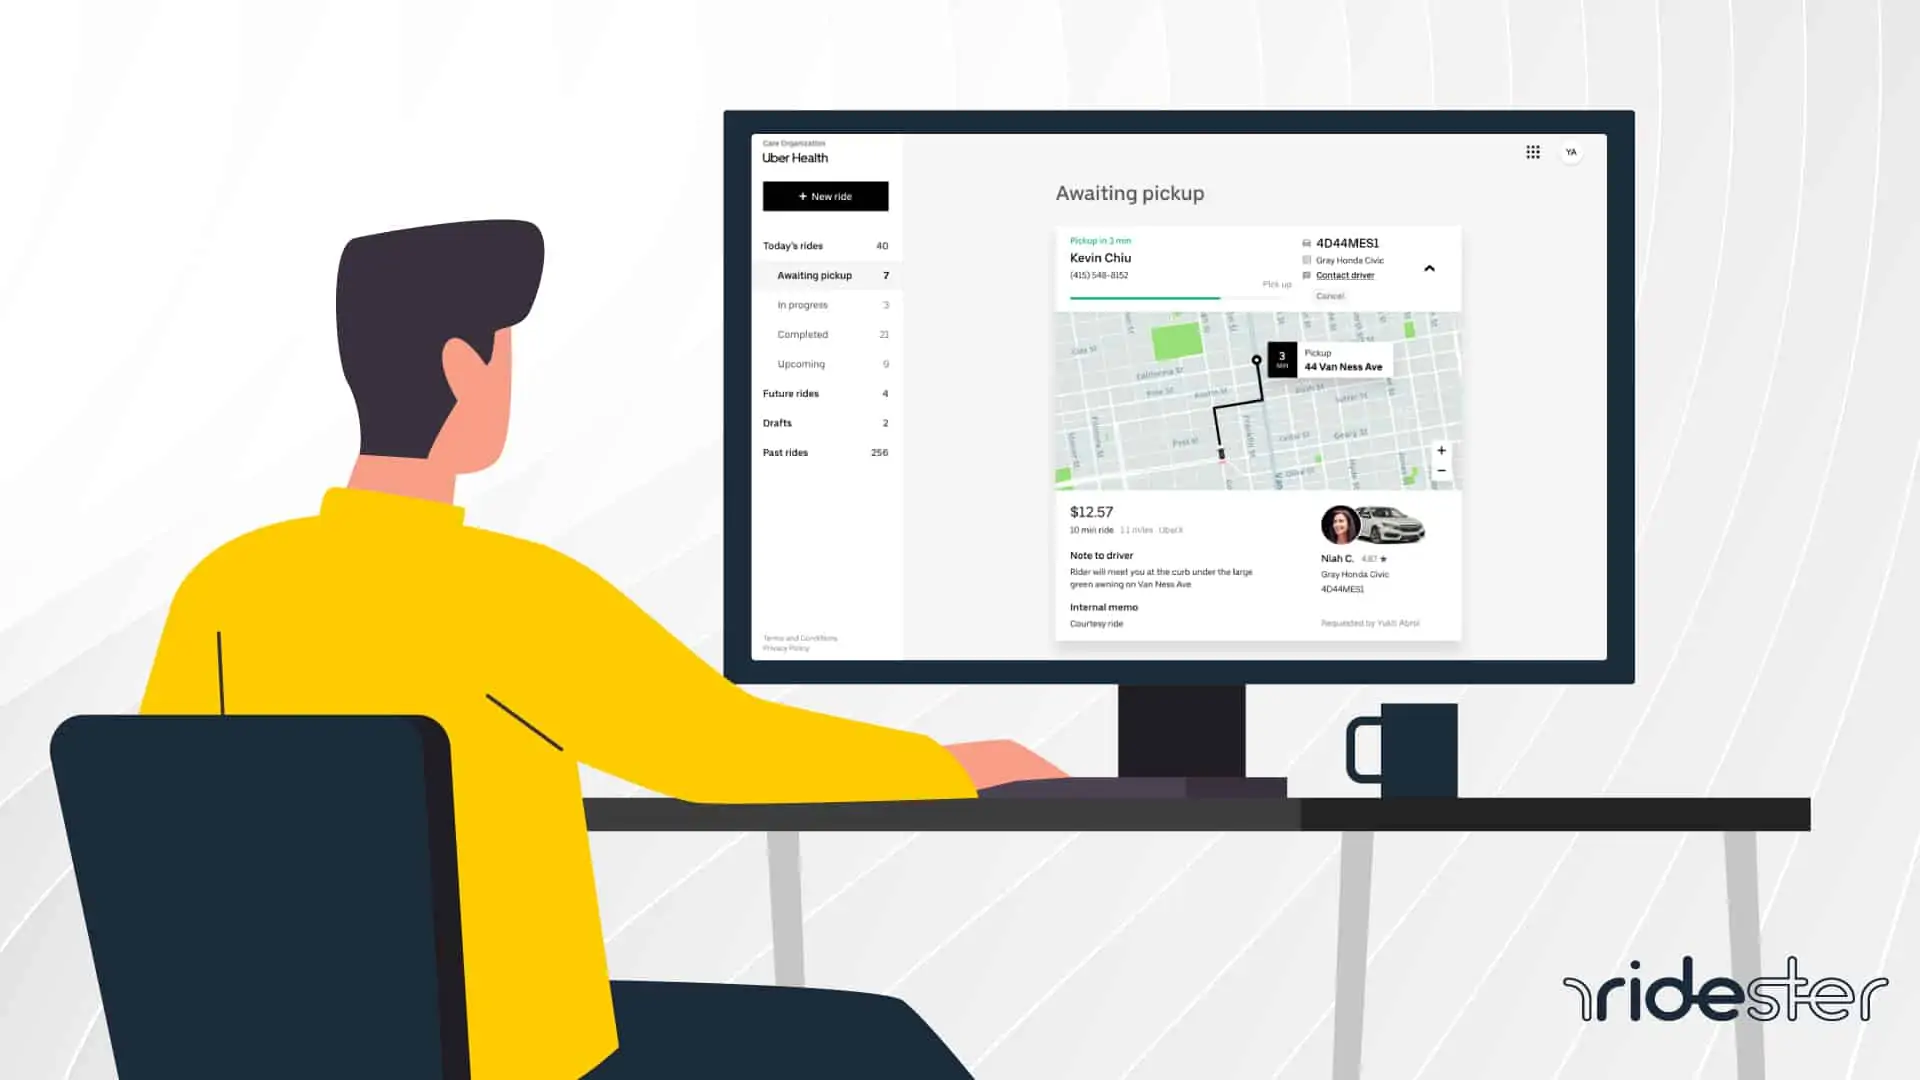 vector graphic showing illustration of Uber Health user sitting at computer